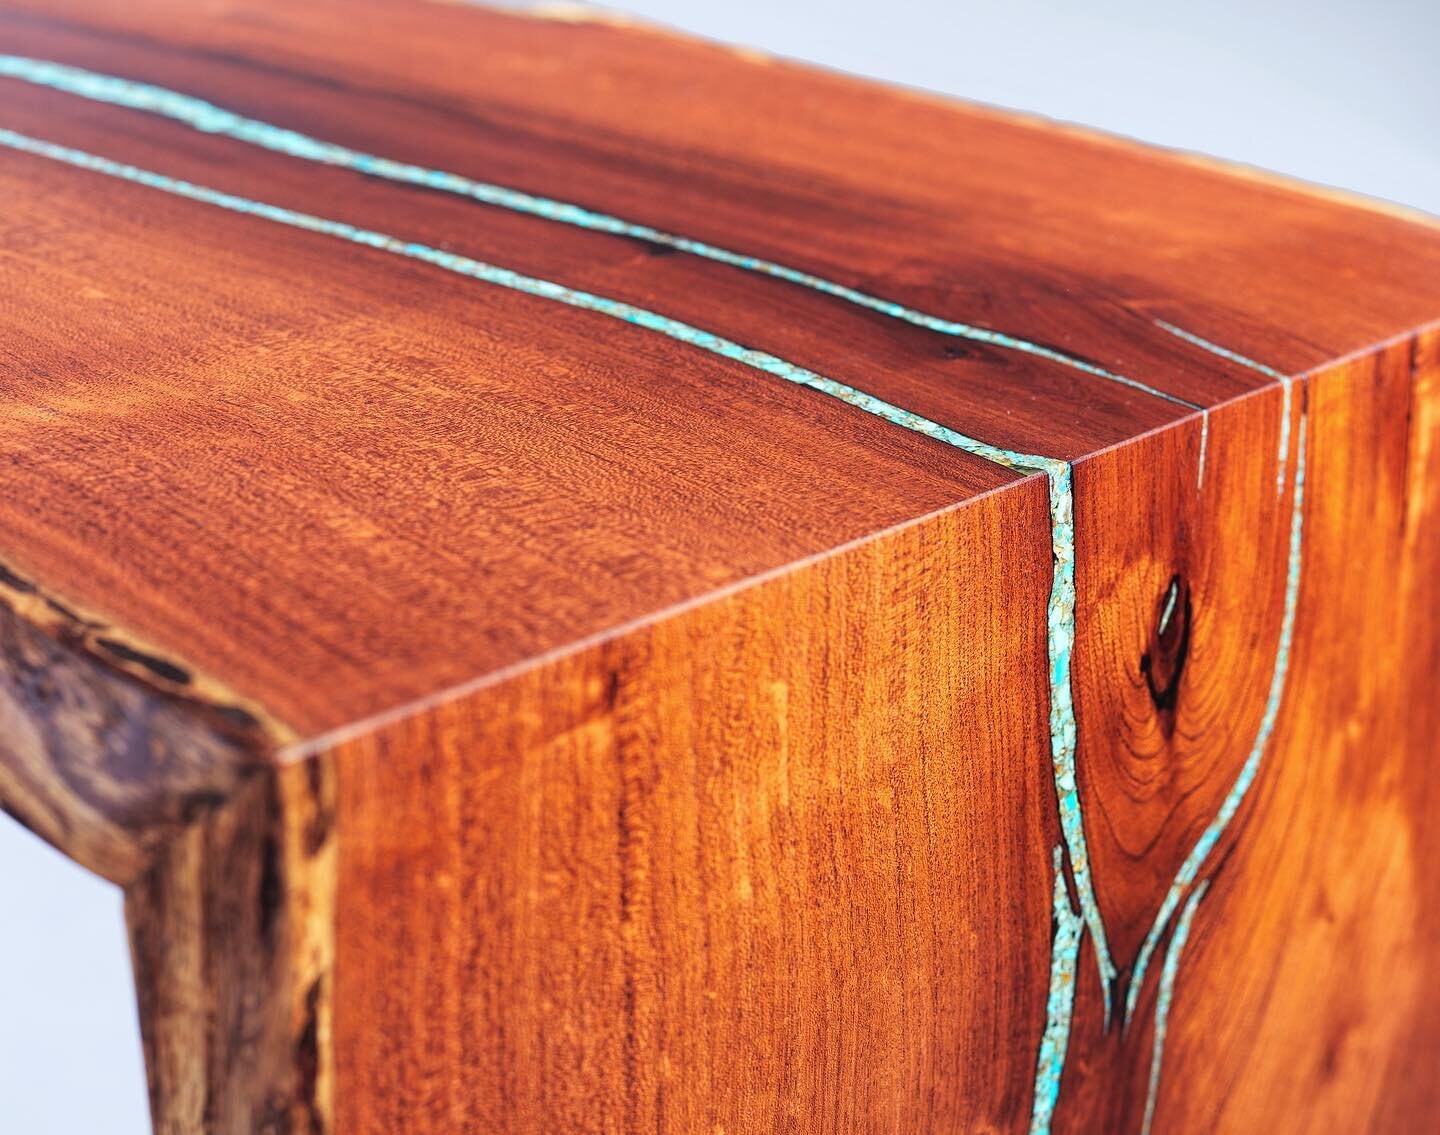 Here&rsquo;s a close up. The Kingman turquoise inlay wraps around all three sides of this double waterfall bench. I mitered this slab to create the legs.
.
Photo by @ingahendrickson 
.
.
.
.

.

#madeinsantafe #familyofmakers 
#turquoise #turquoisein